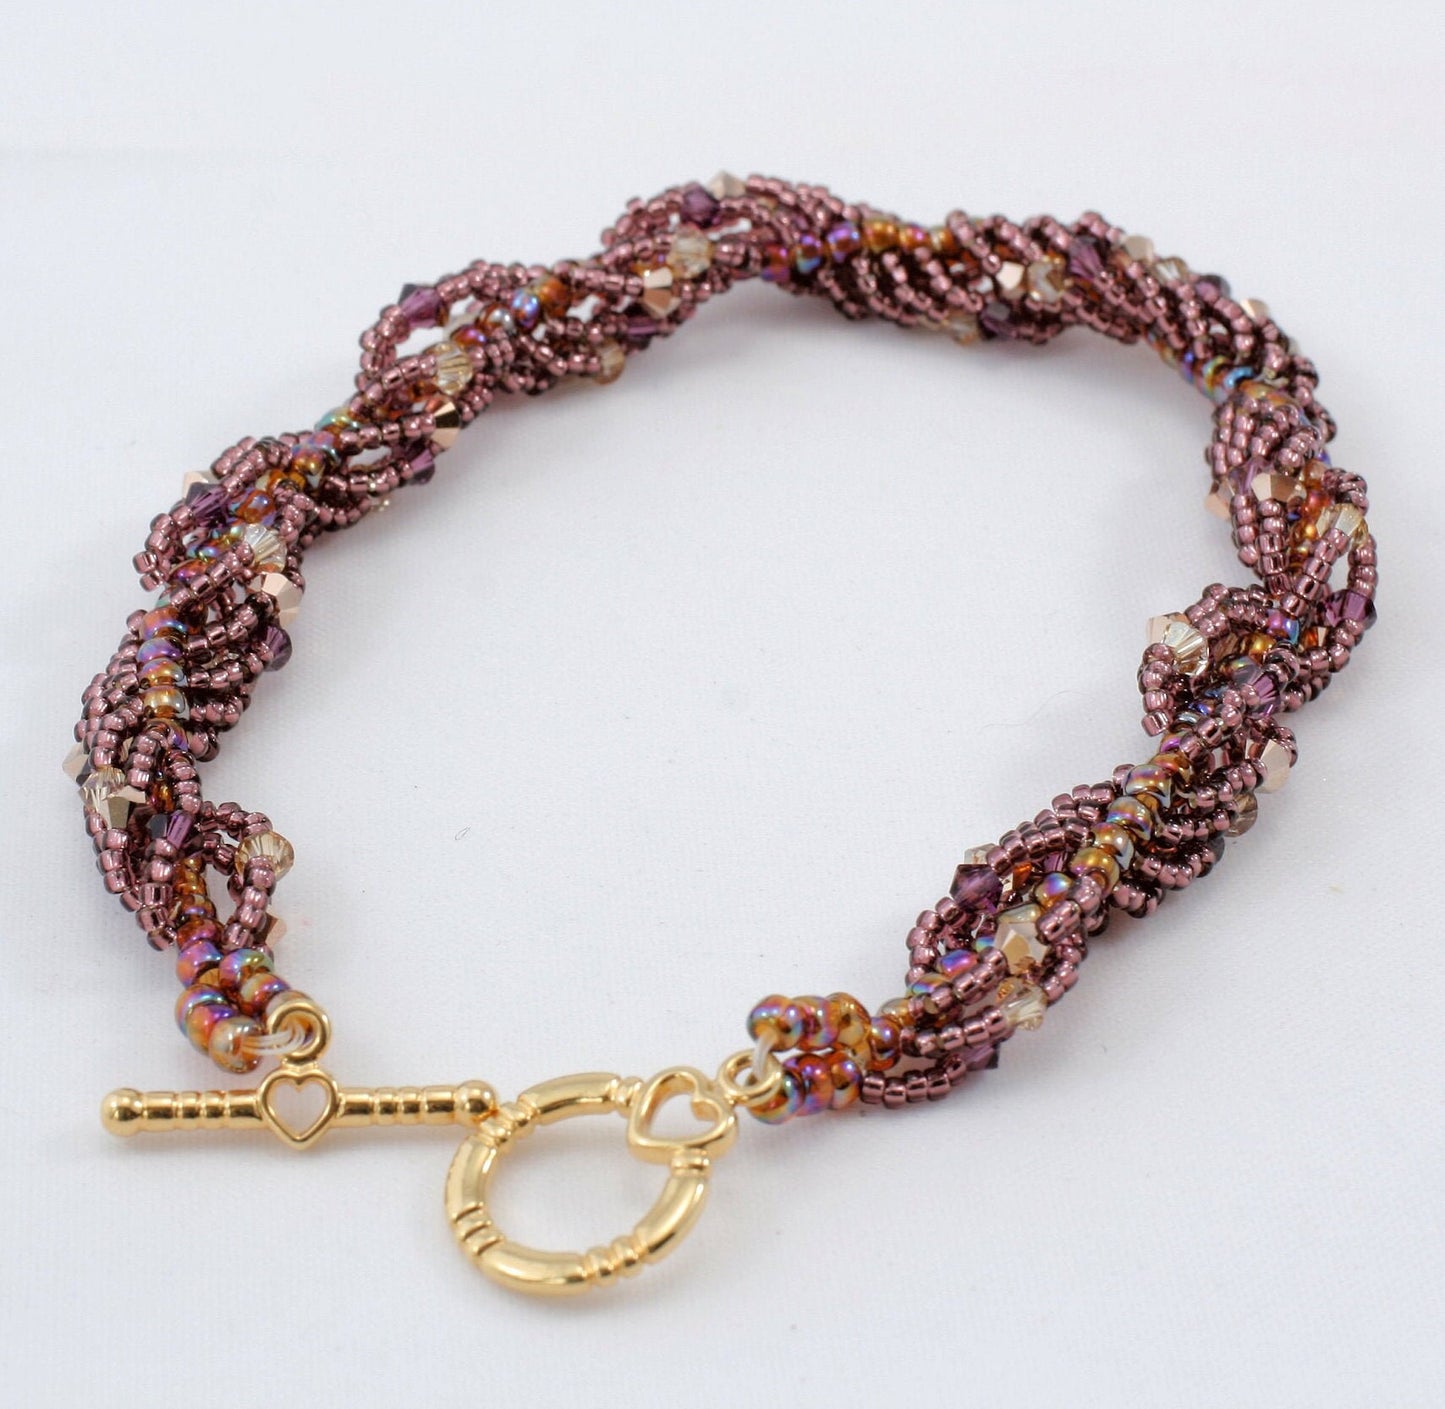 Lavender Spiral Rope Beaded Bracelet with Toggle Clasp